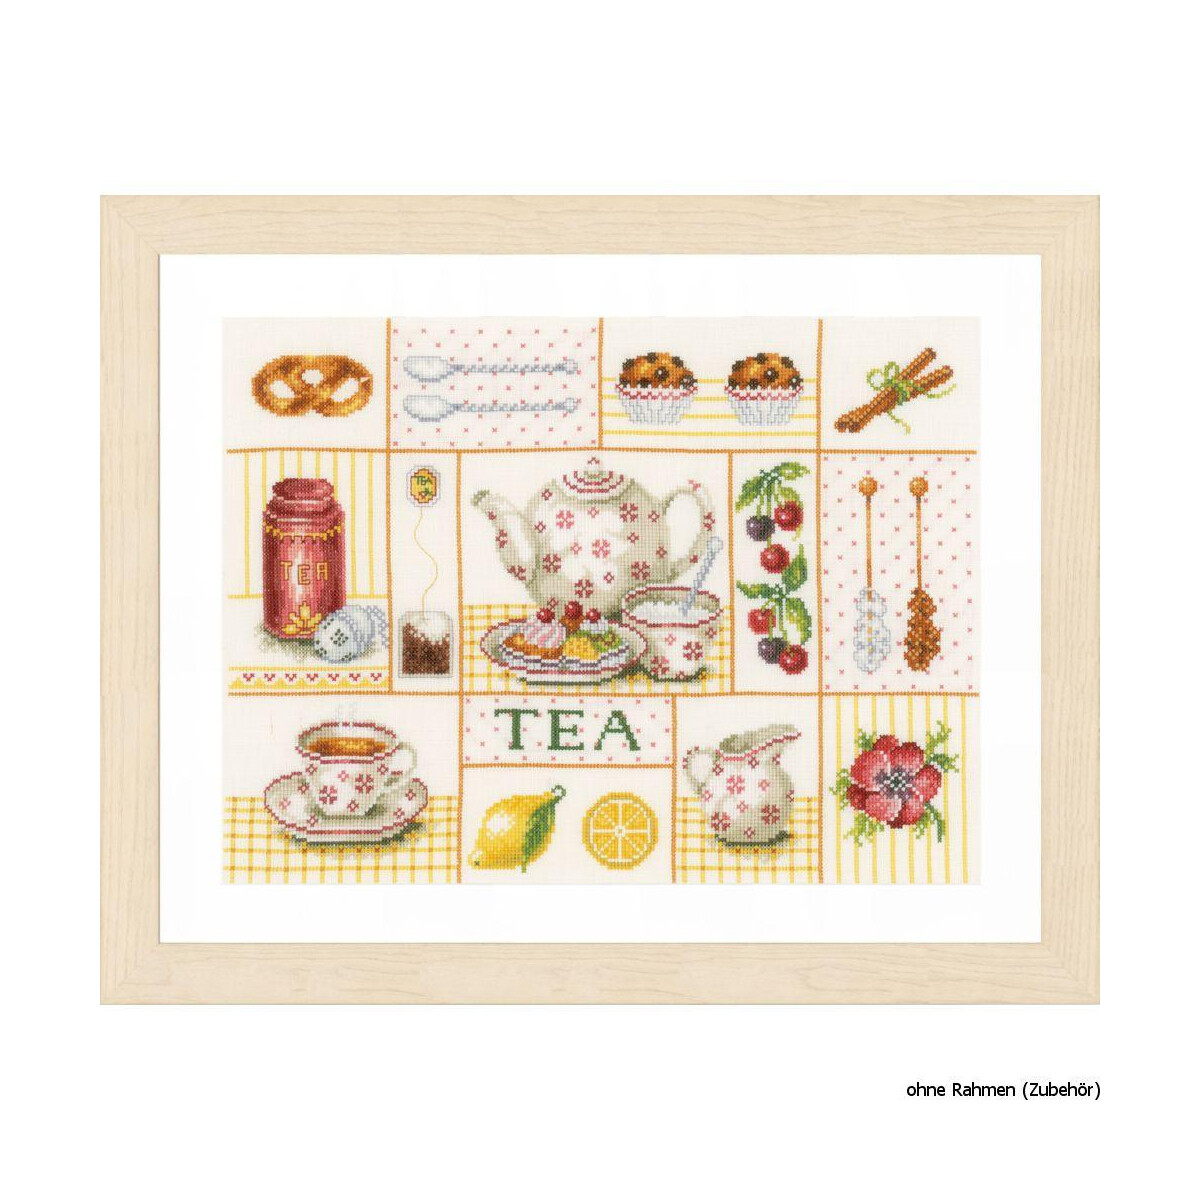 A framed cross stitch artwork features a tea theme and...